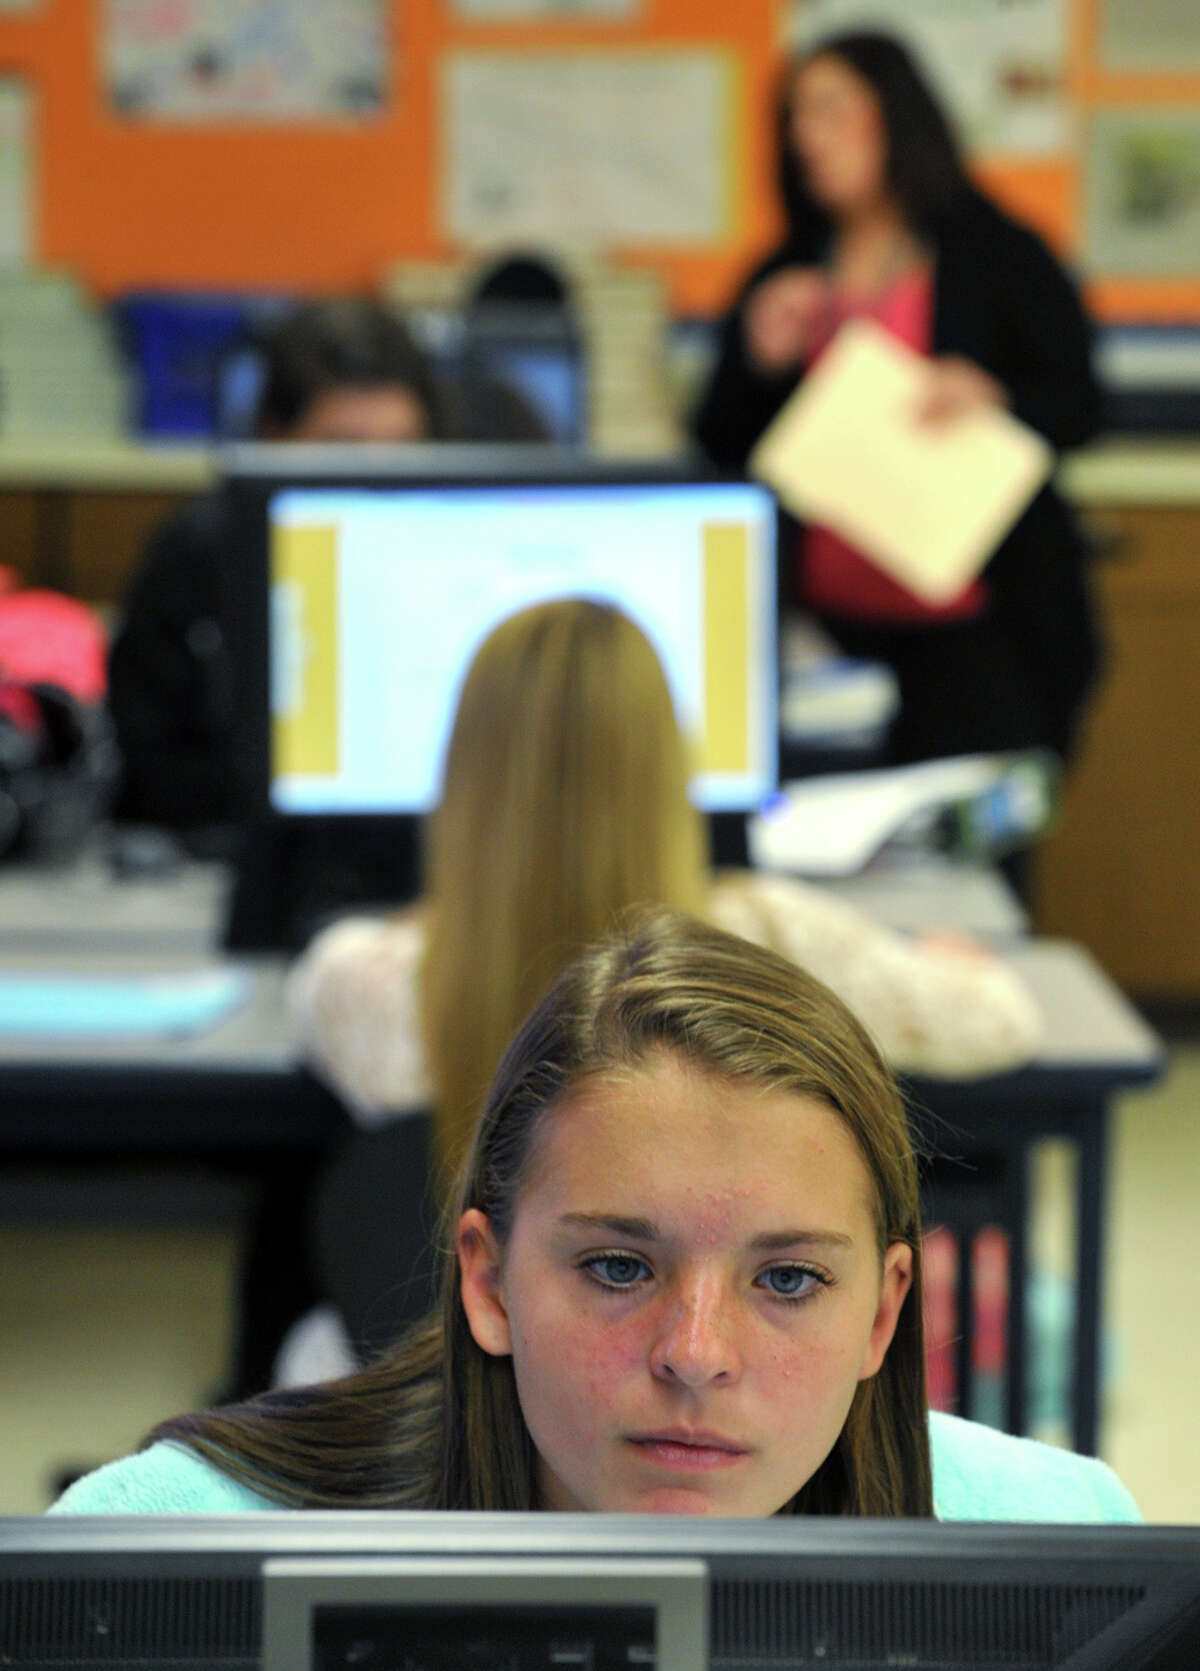 Katie Flournoy, 17, does research during a financial literacy class in Galloway Township, N.J.